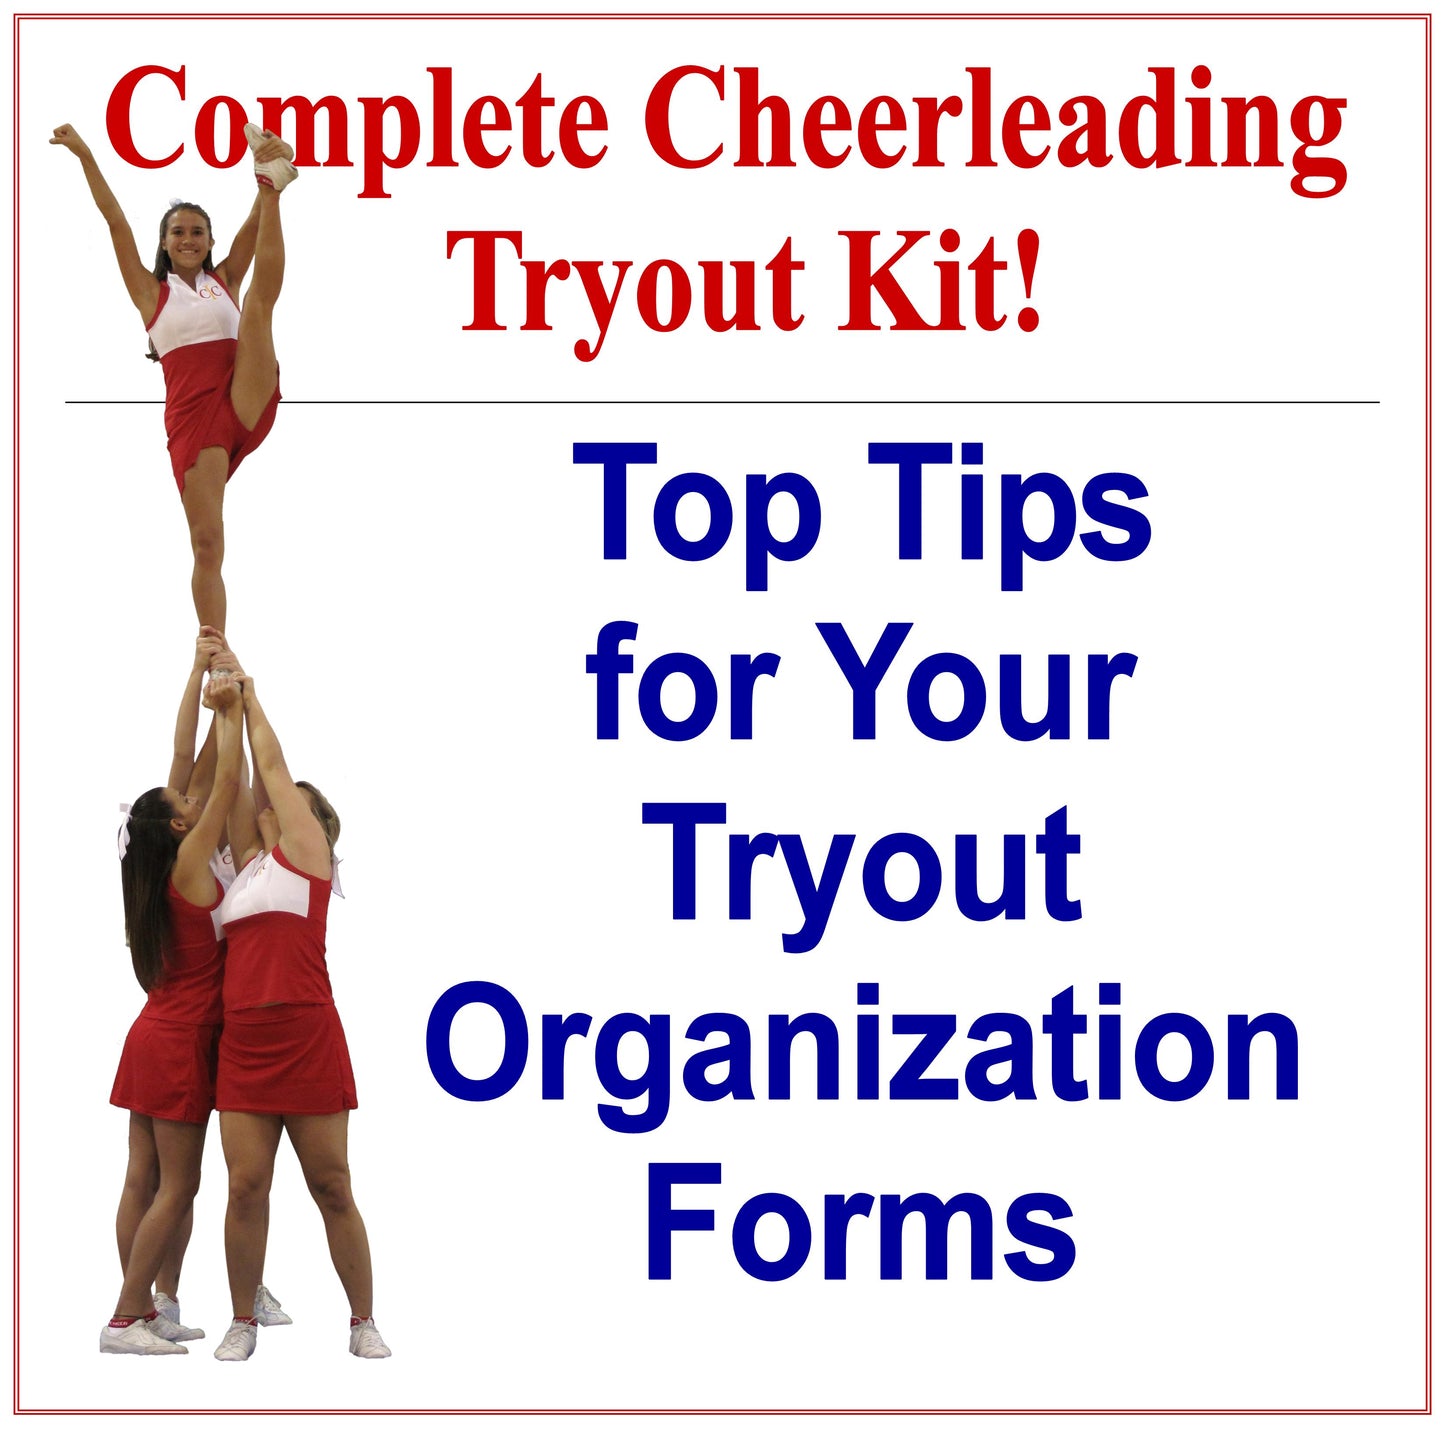 Top Tips to Maximize Your Cheerleading Tryout Organization Forms